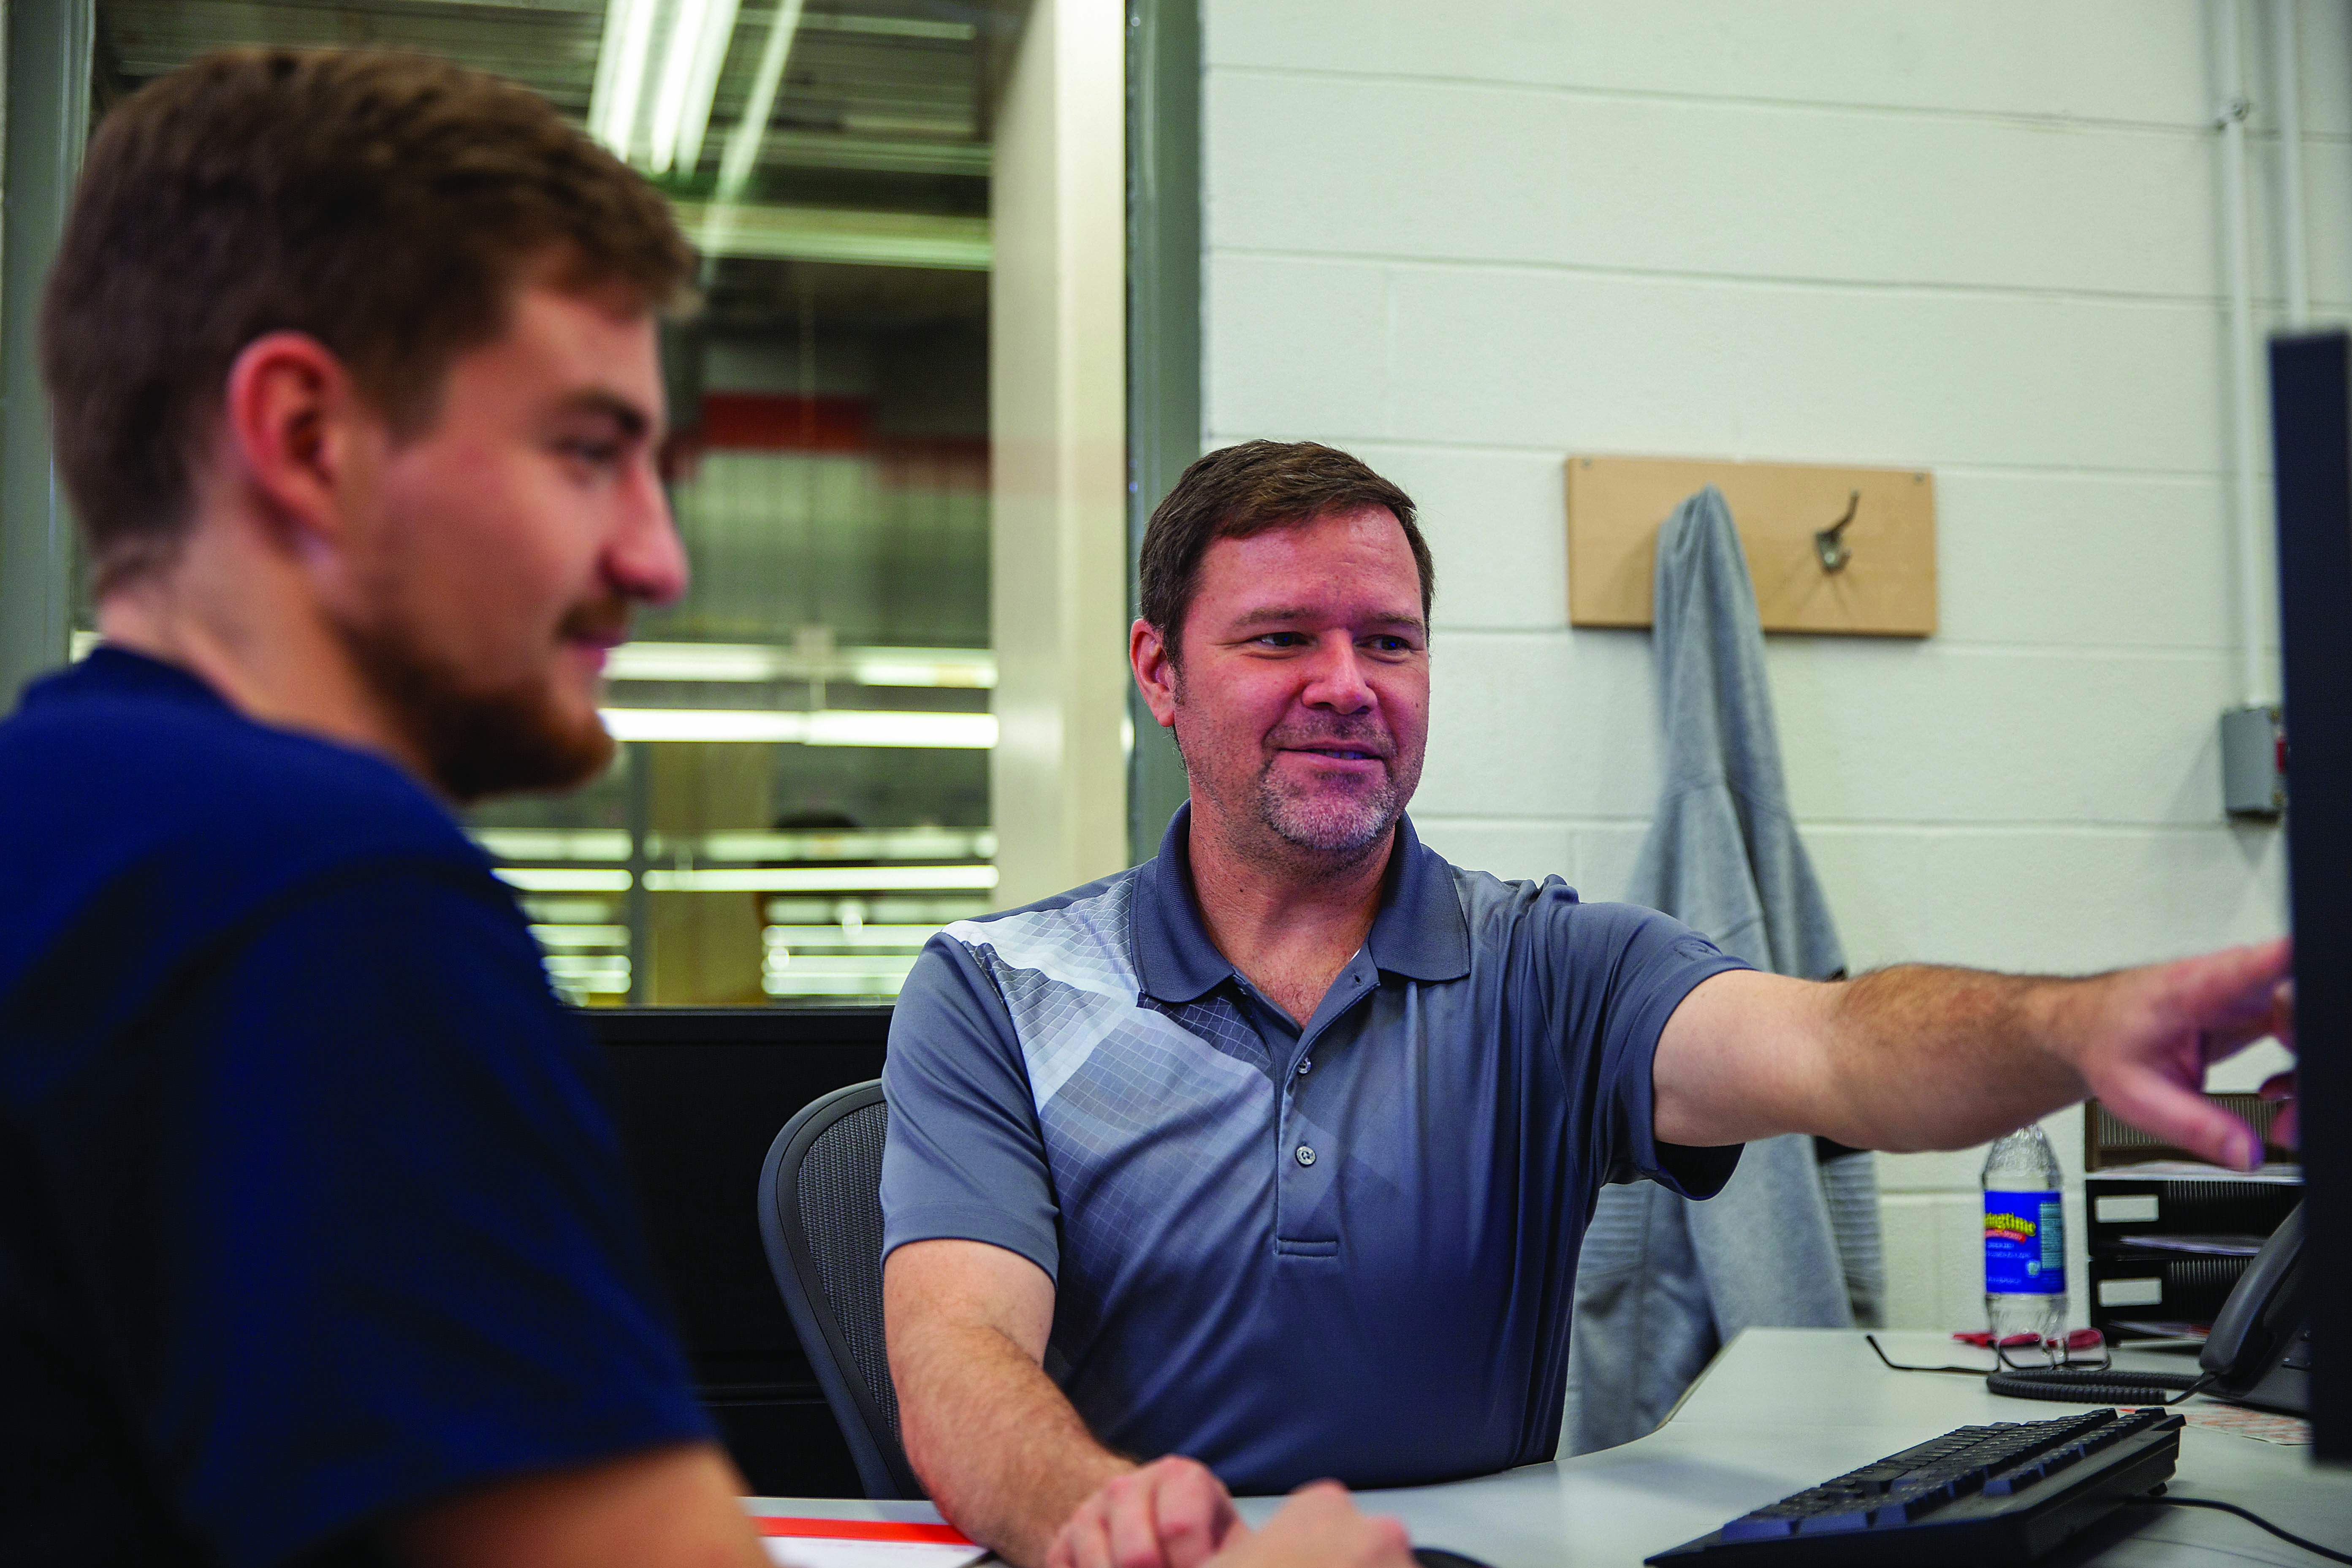 Apprenticeship trainer Jim Neal (above) works with a student at Blum’s factory in North Carolina.